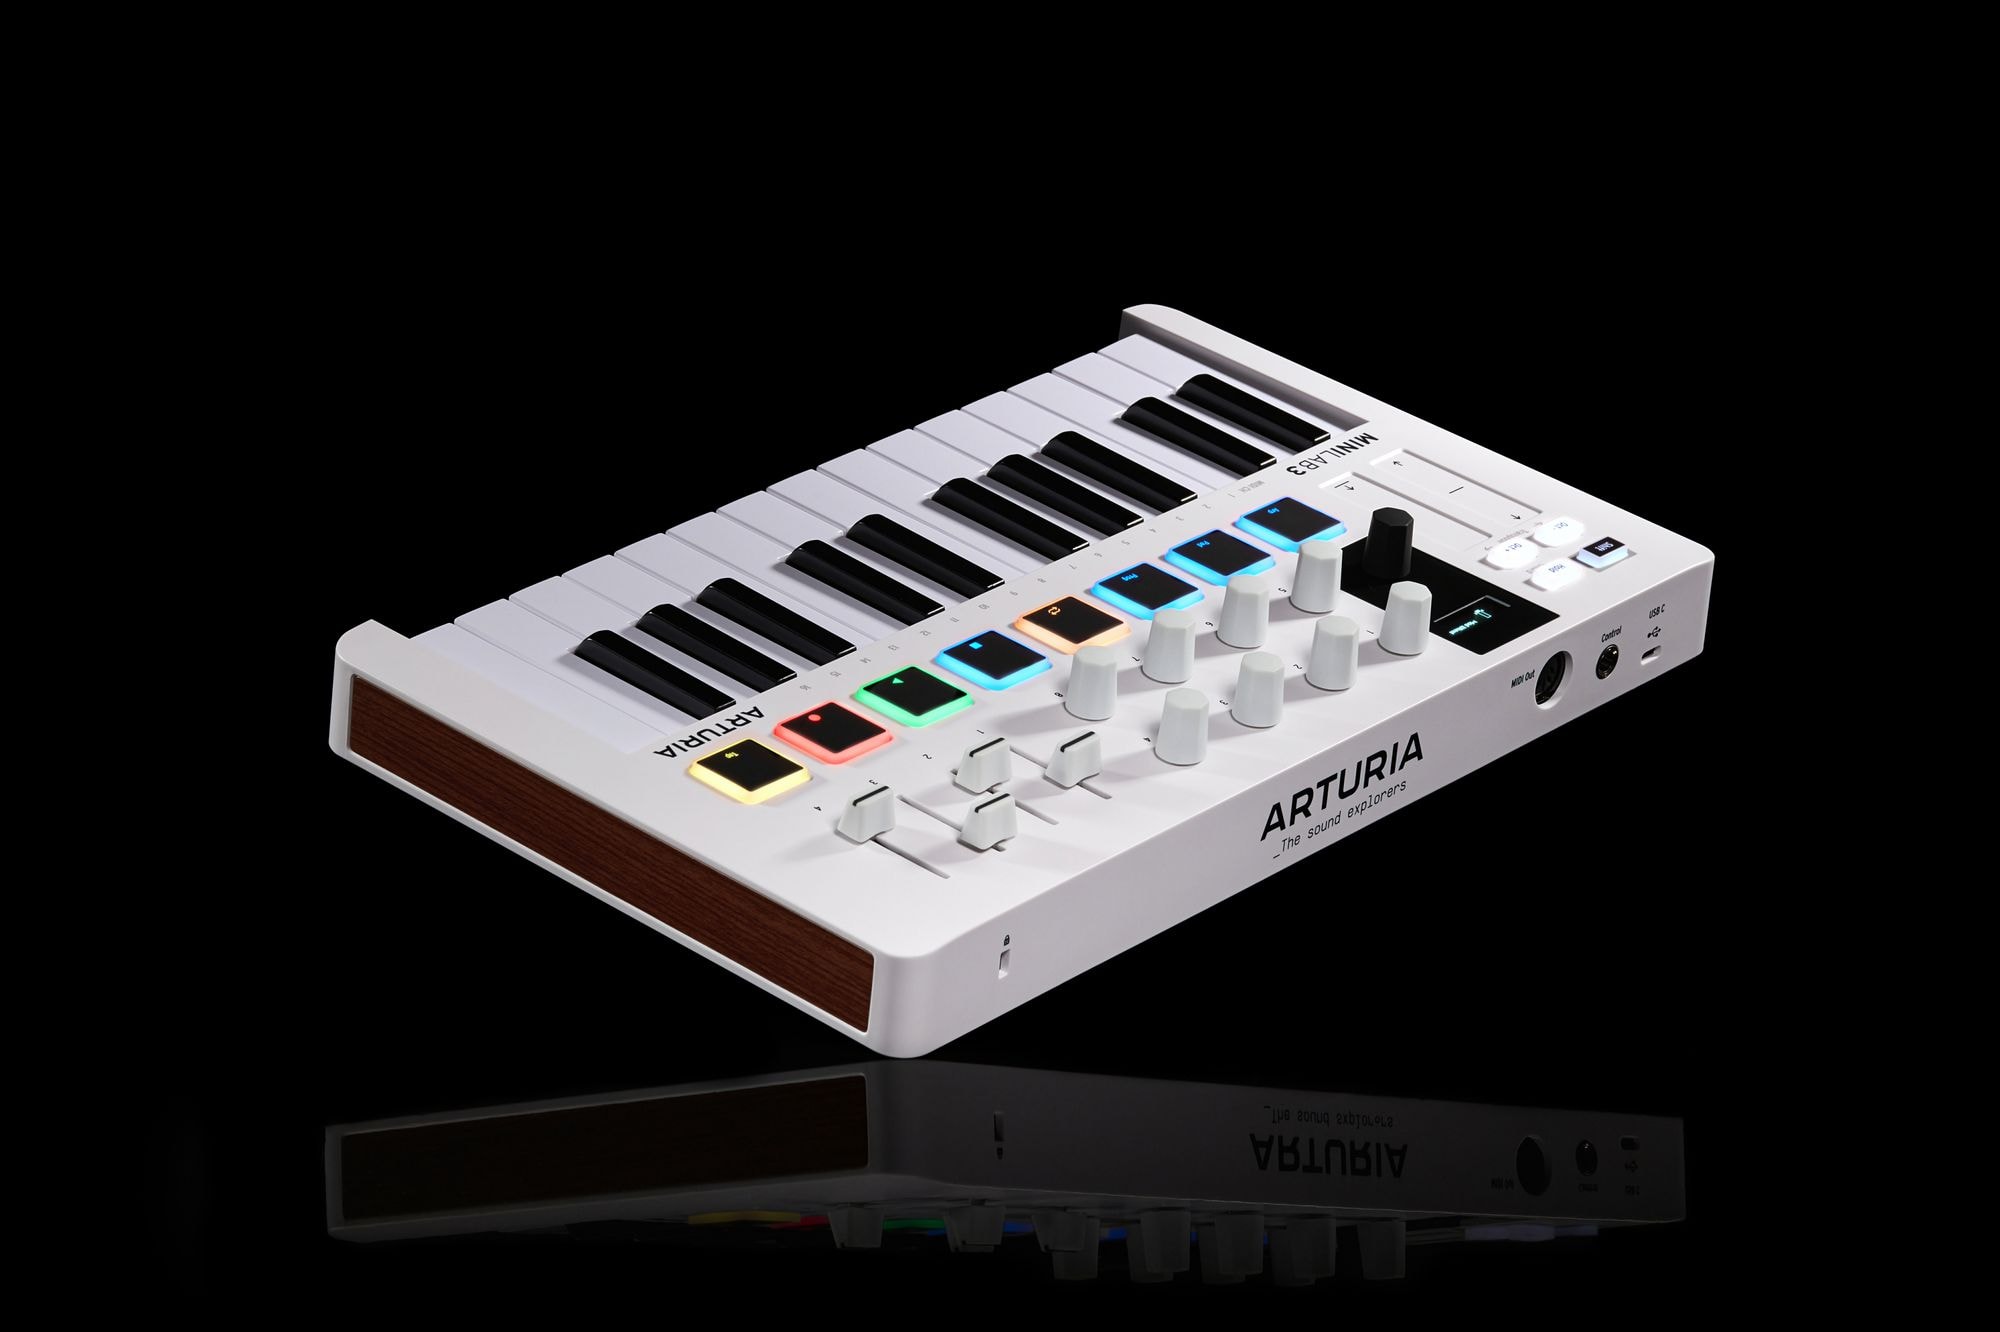 Arturia MiniLab 3 review: Compact controller for your entire studio